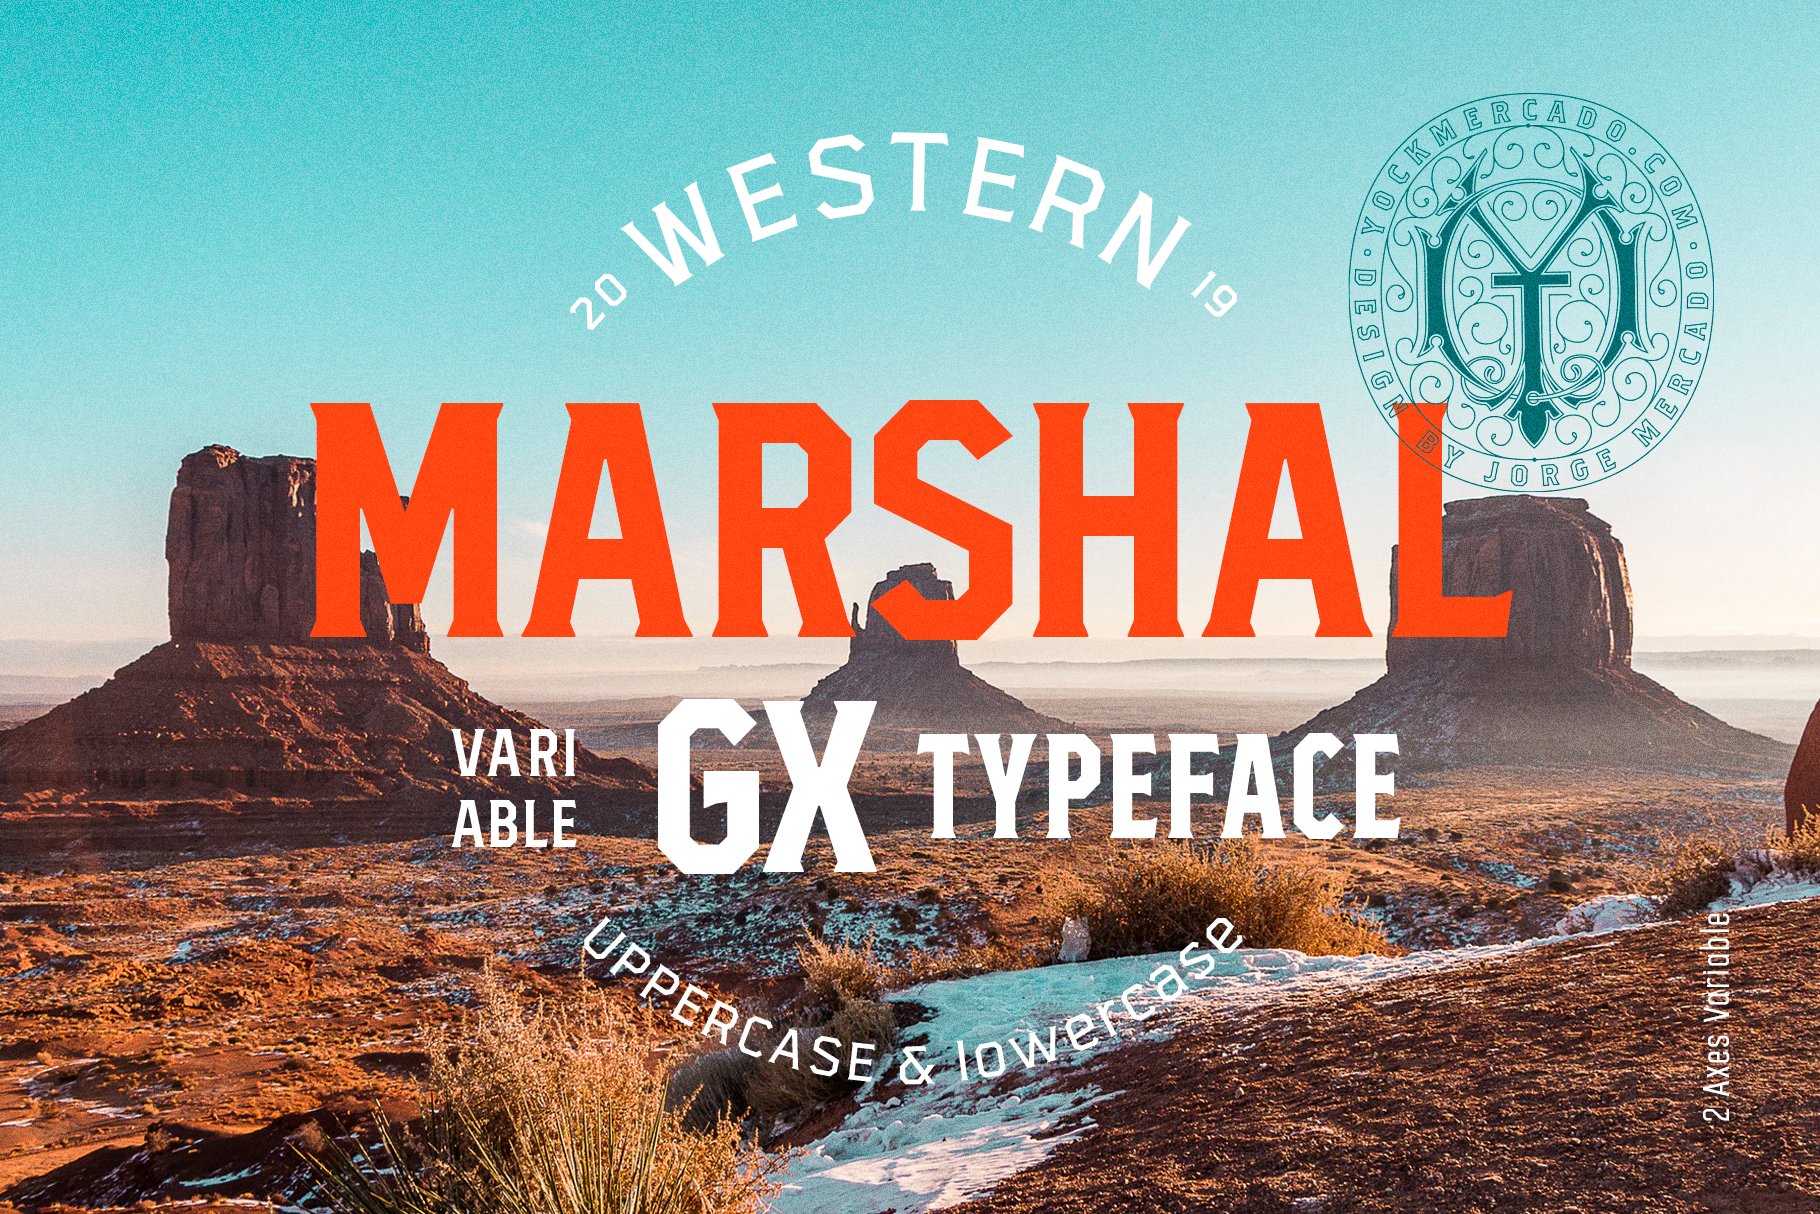 Marshal Variable Typeface cover image.